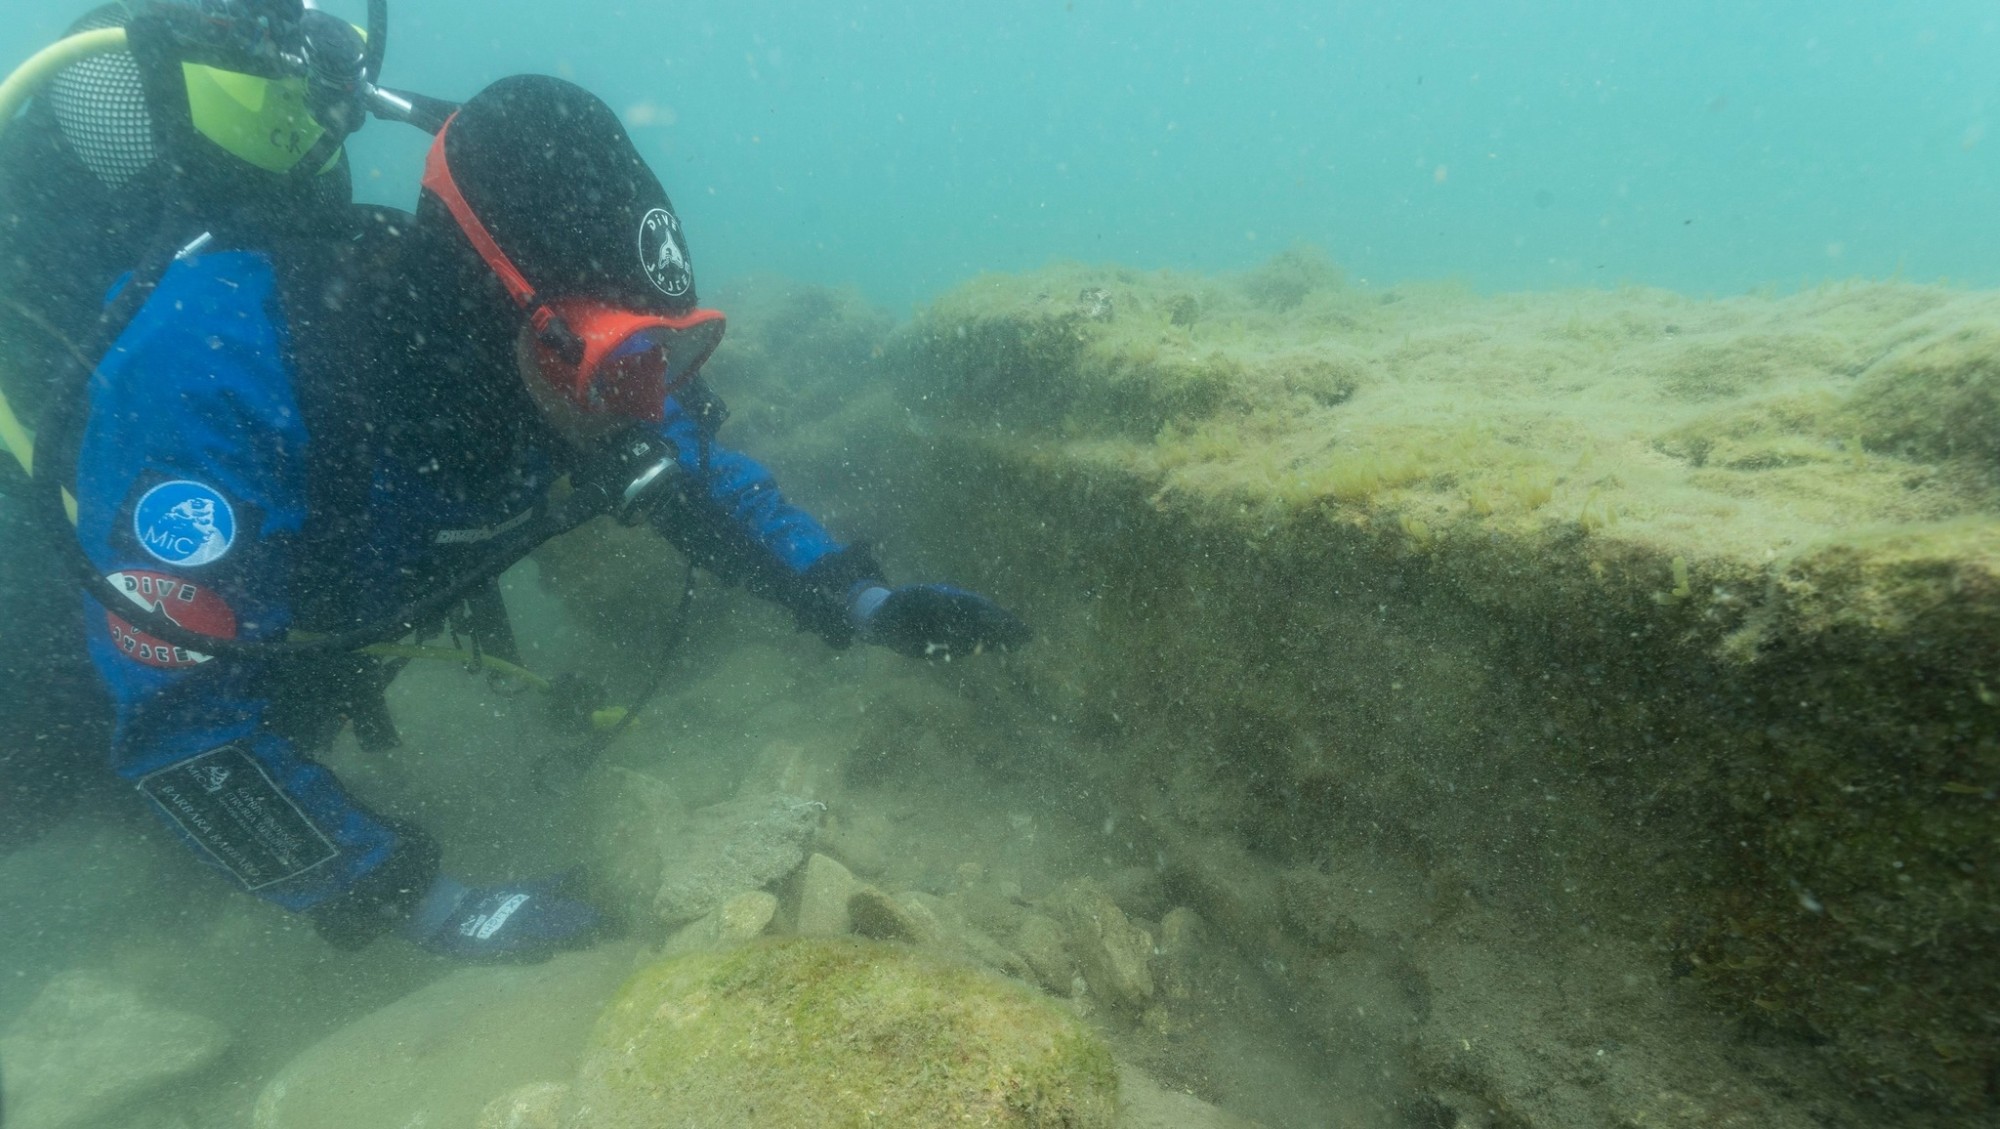 The restoration project, carried out by the Underwater Archaeology Service of the Superintendency, involved cleaning and stabilizing the structure.